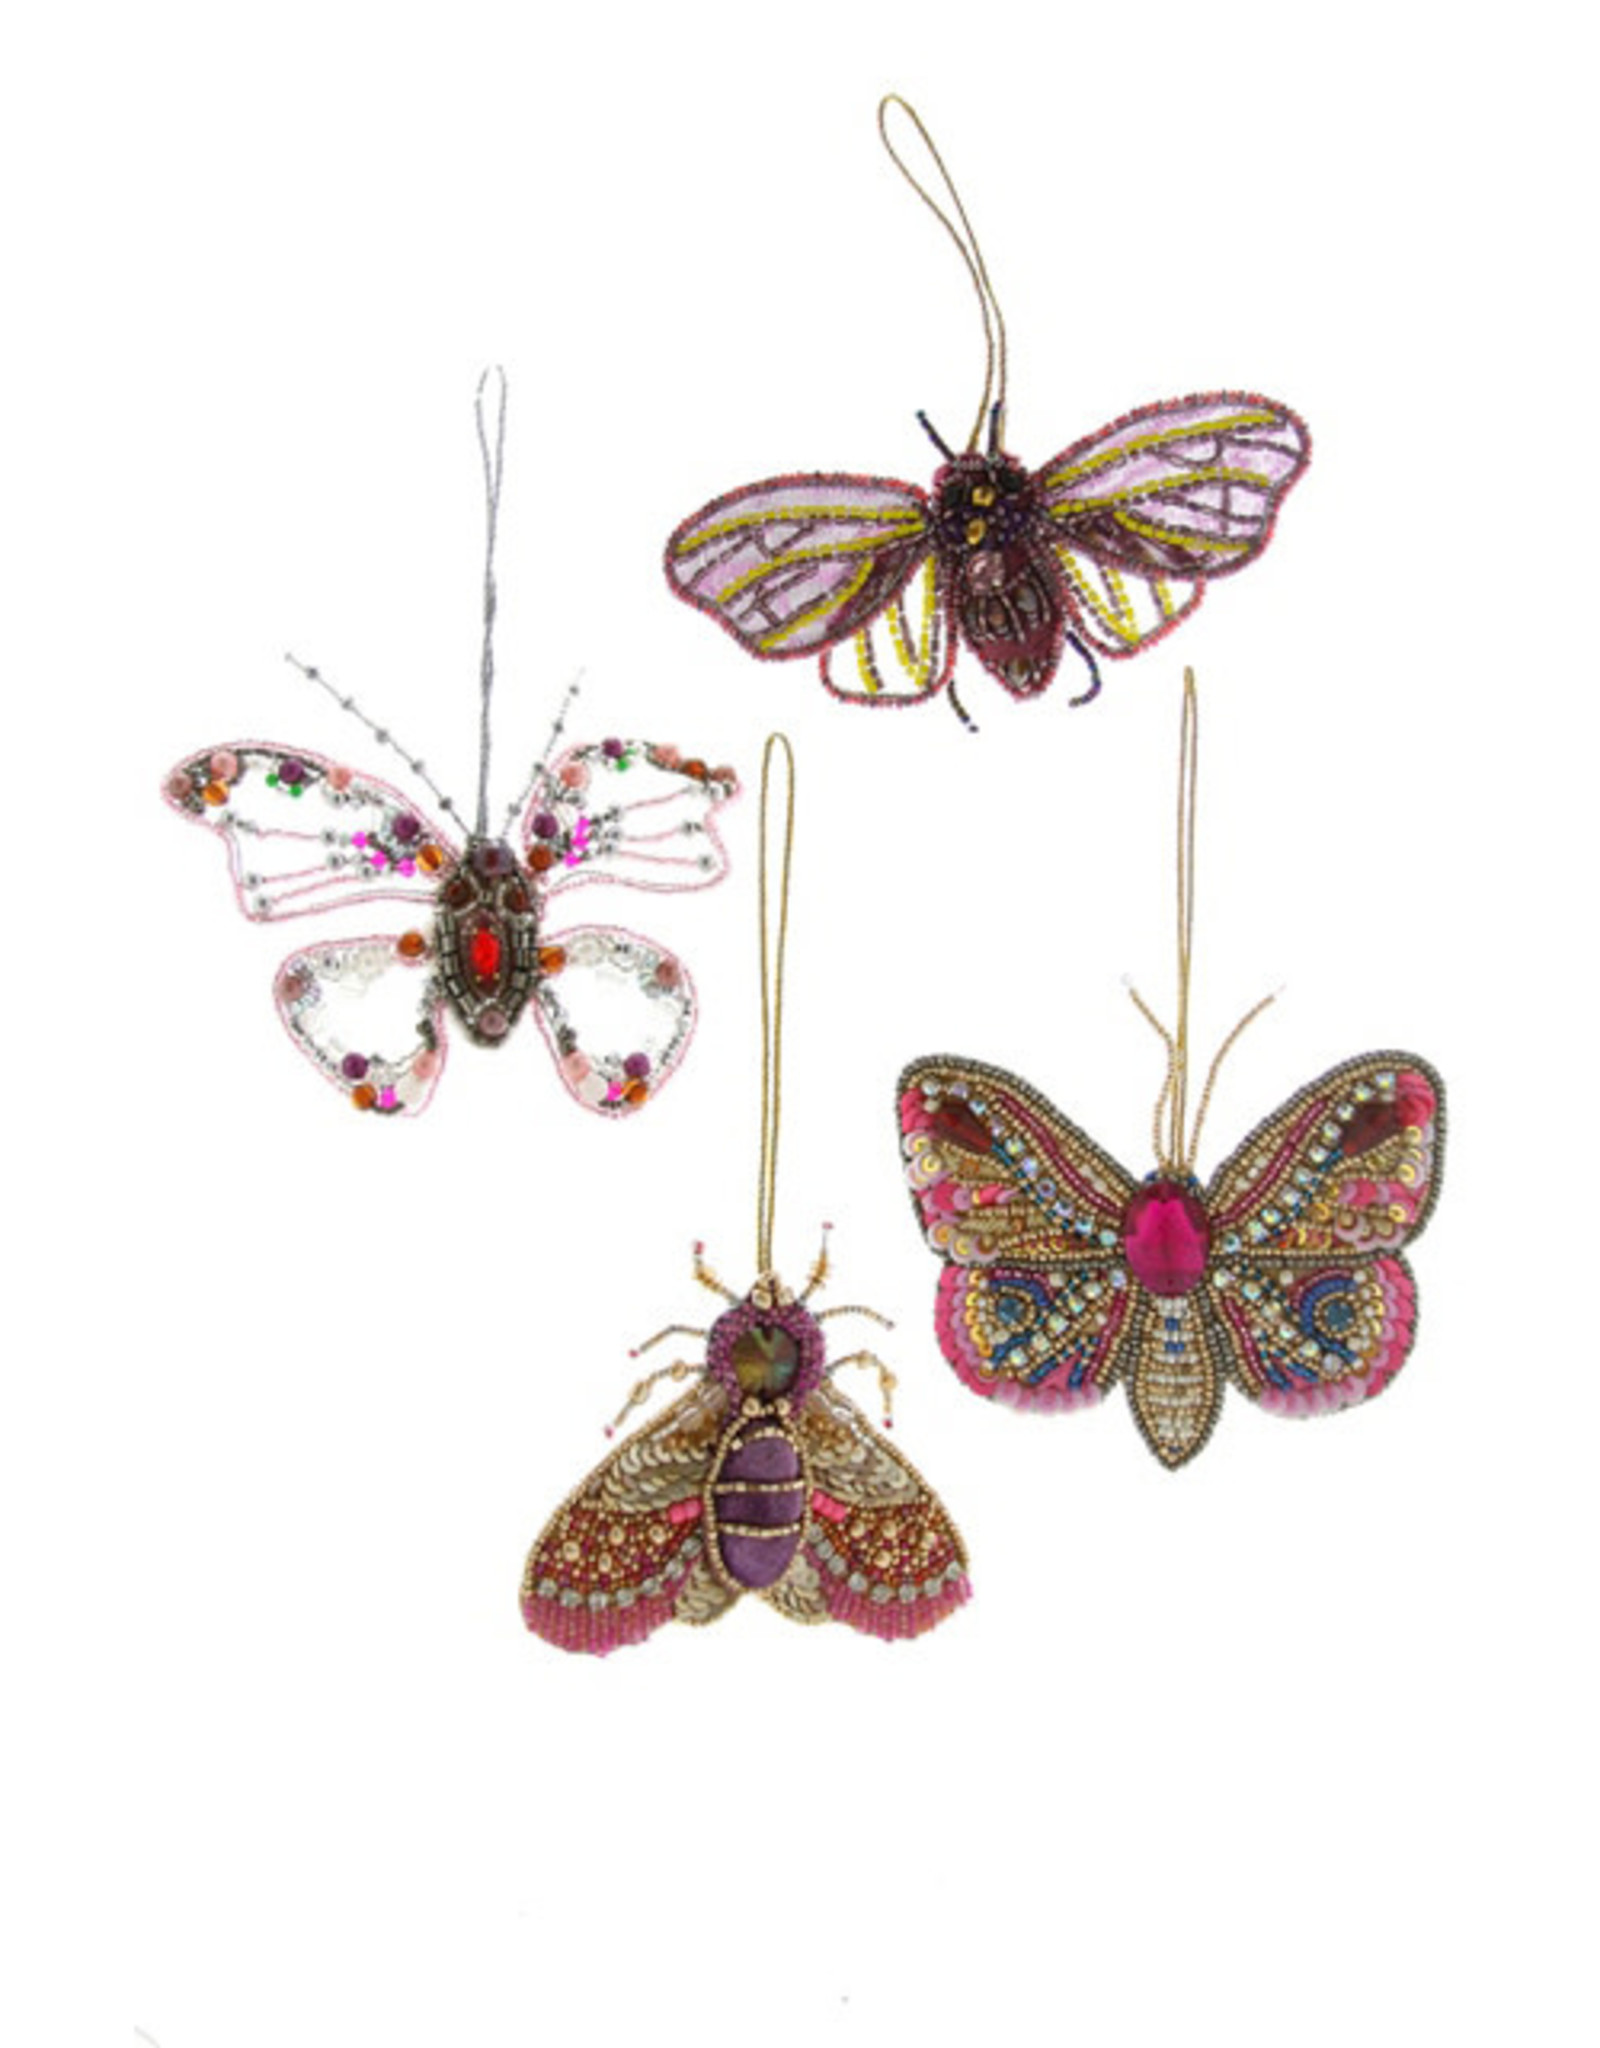 Cody Foster & Co. BEADED WINGED INSECTS ORNAMENT - 4 STYLES